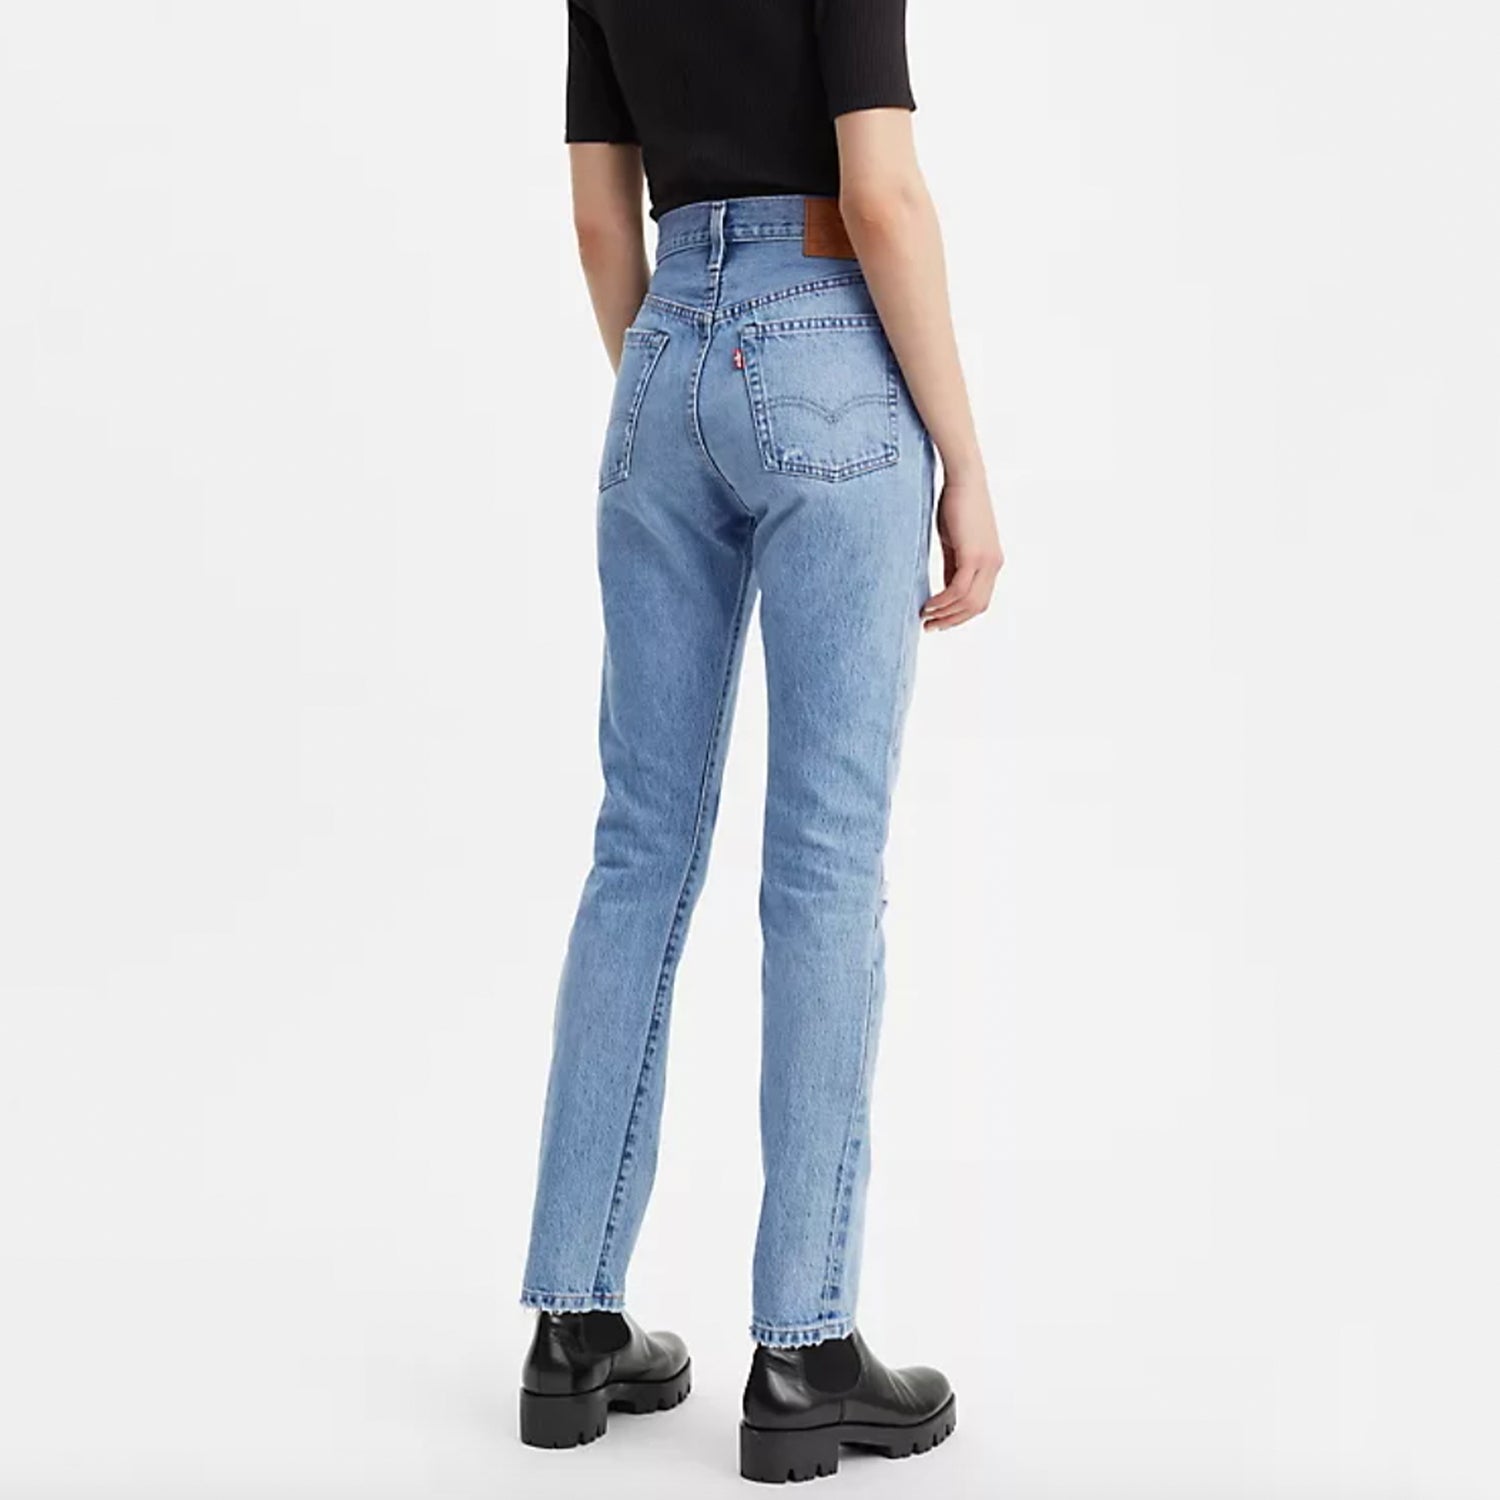 Levi's Jeans For Women Long Bottoms. Literally the blueprint for every pair of jeans in existence. To this day they've never gone out of style. And they never will